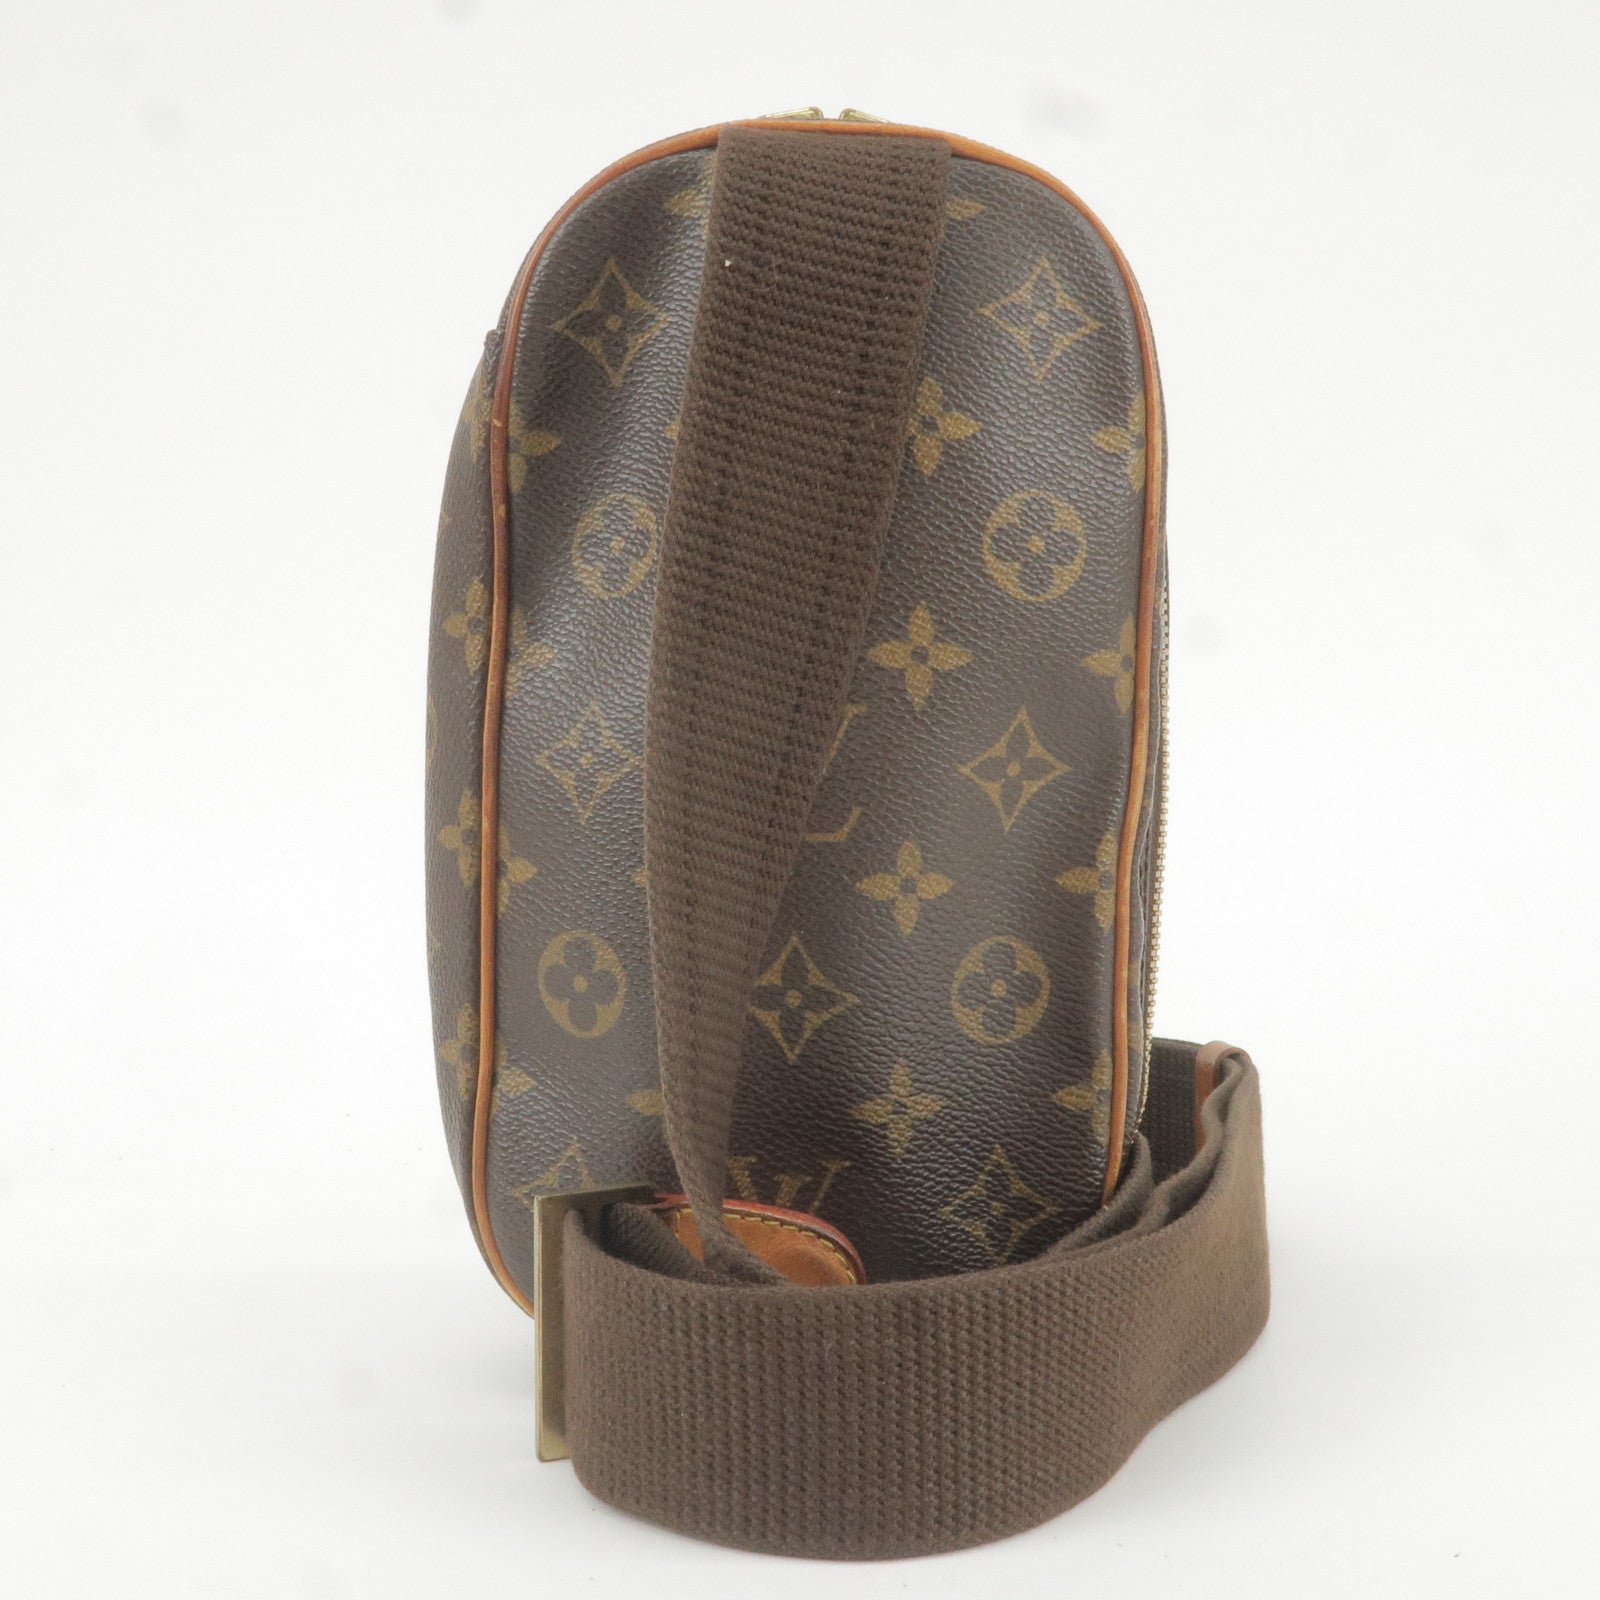 Pre-owned Louis Vuitton Belt In Red